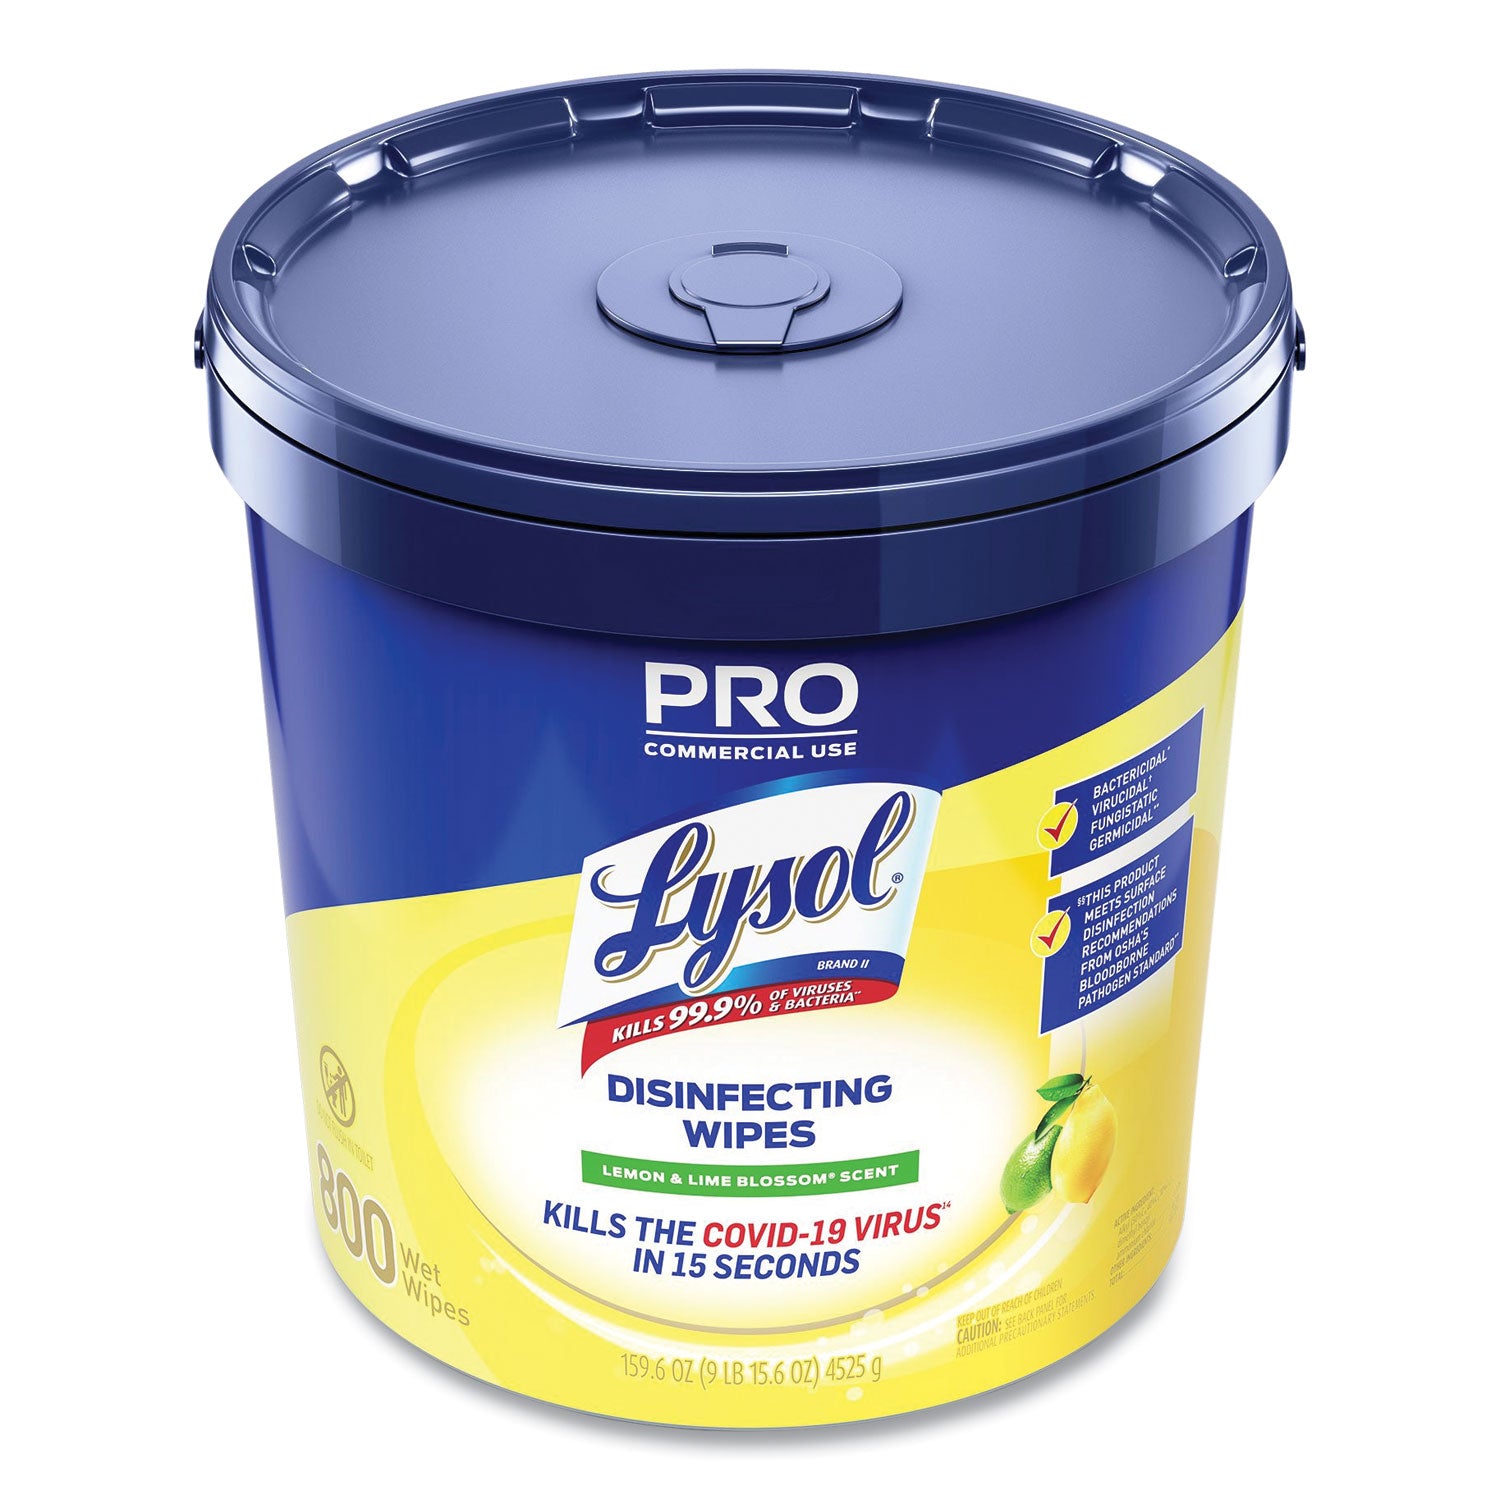 professional-disinfecting-wipe-bucket-1-ply-6-x-8-lemon-and-lime-blossom-white-800-wipes_rac99856ea - 8